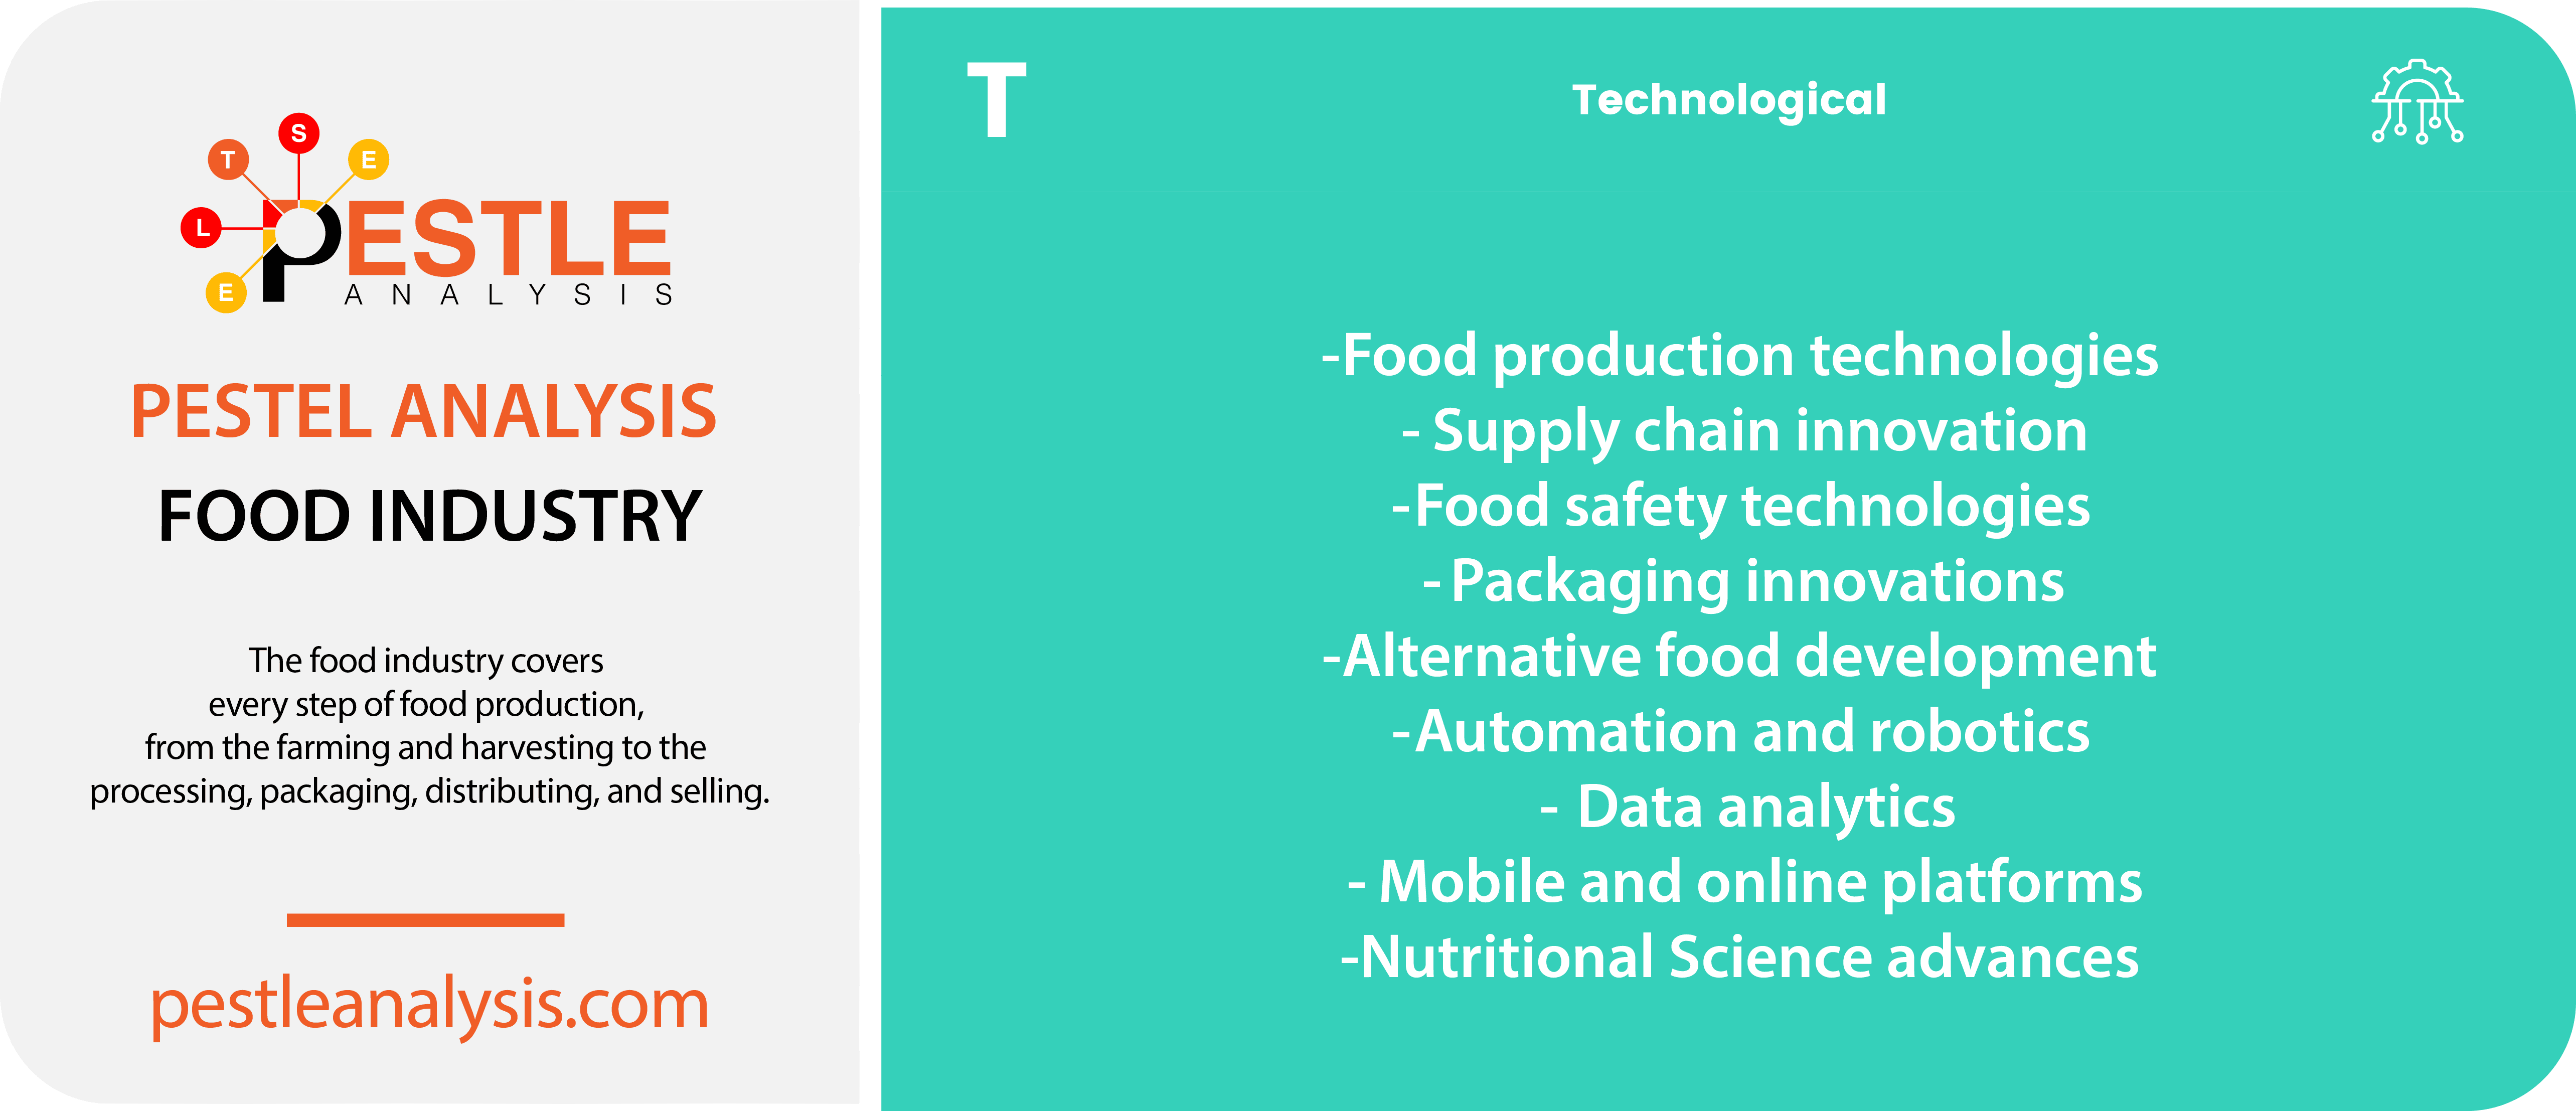 food-industry-pestle-analysis-technological-factors-template